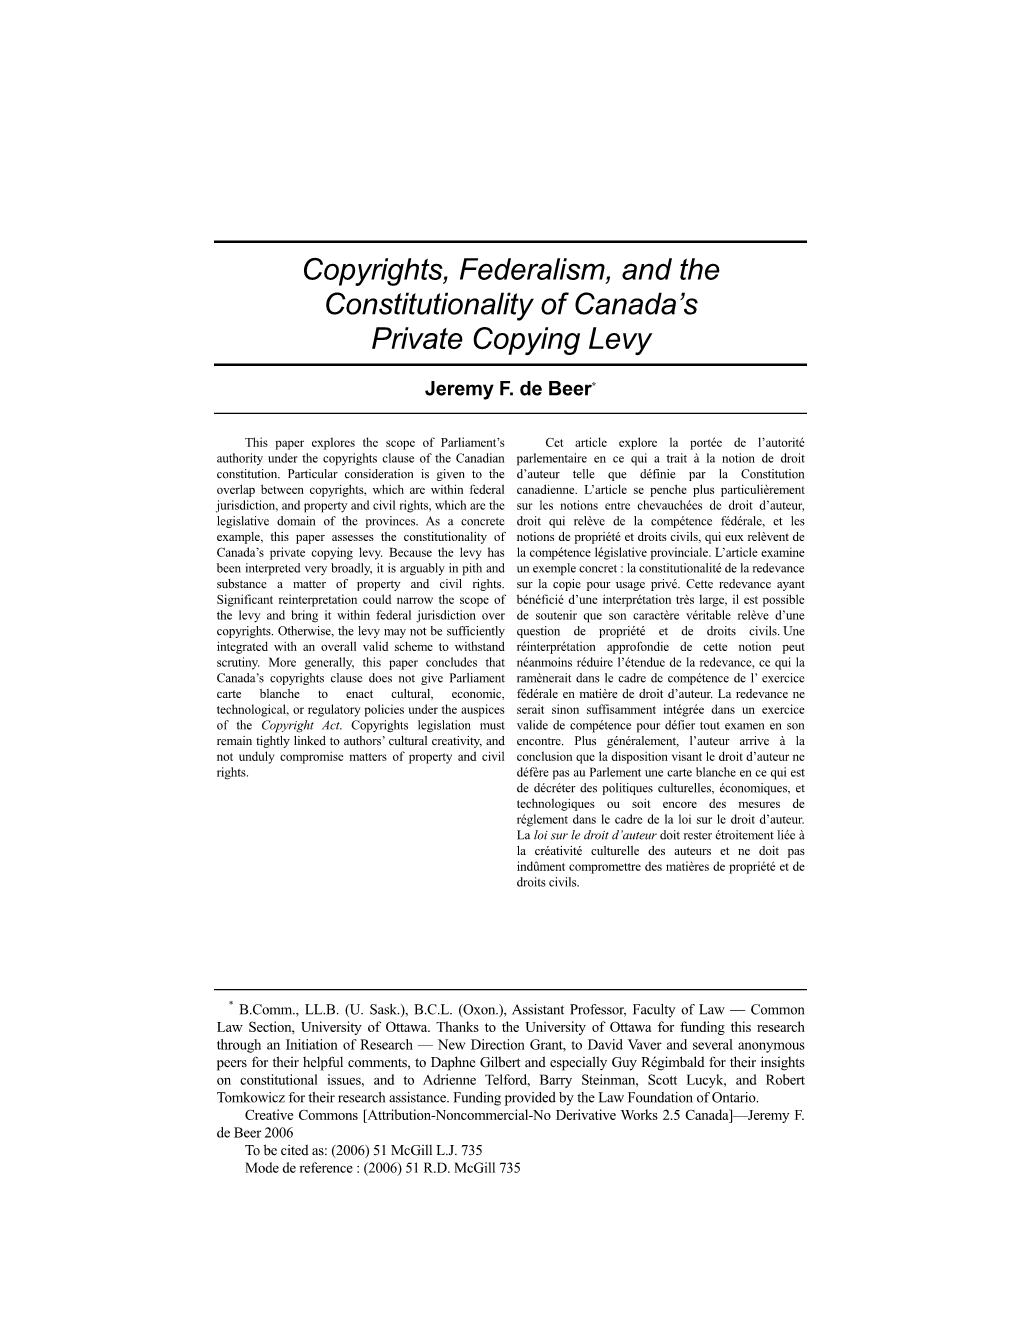 Copyrights, Federalism, and the Constitutionality of Canada's